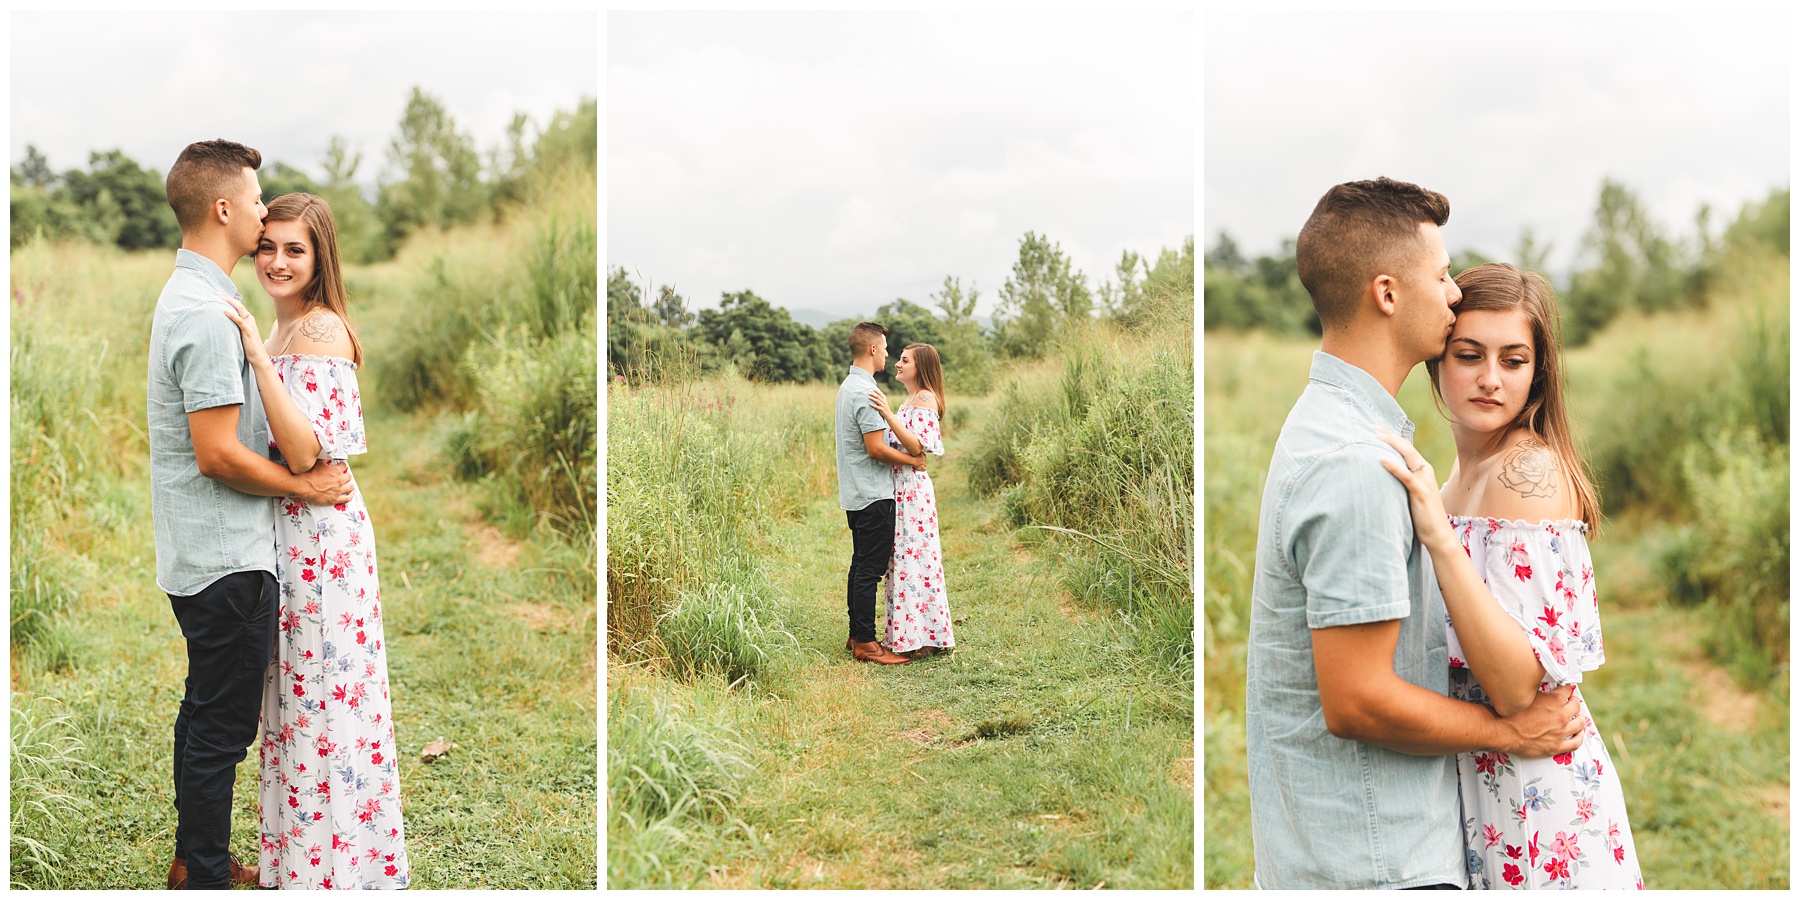 couple embraces during Courtney & Tyler's engagement session at Long Dock Park in Beacon NY